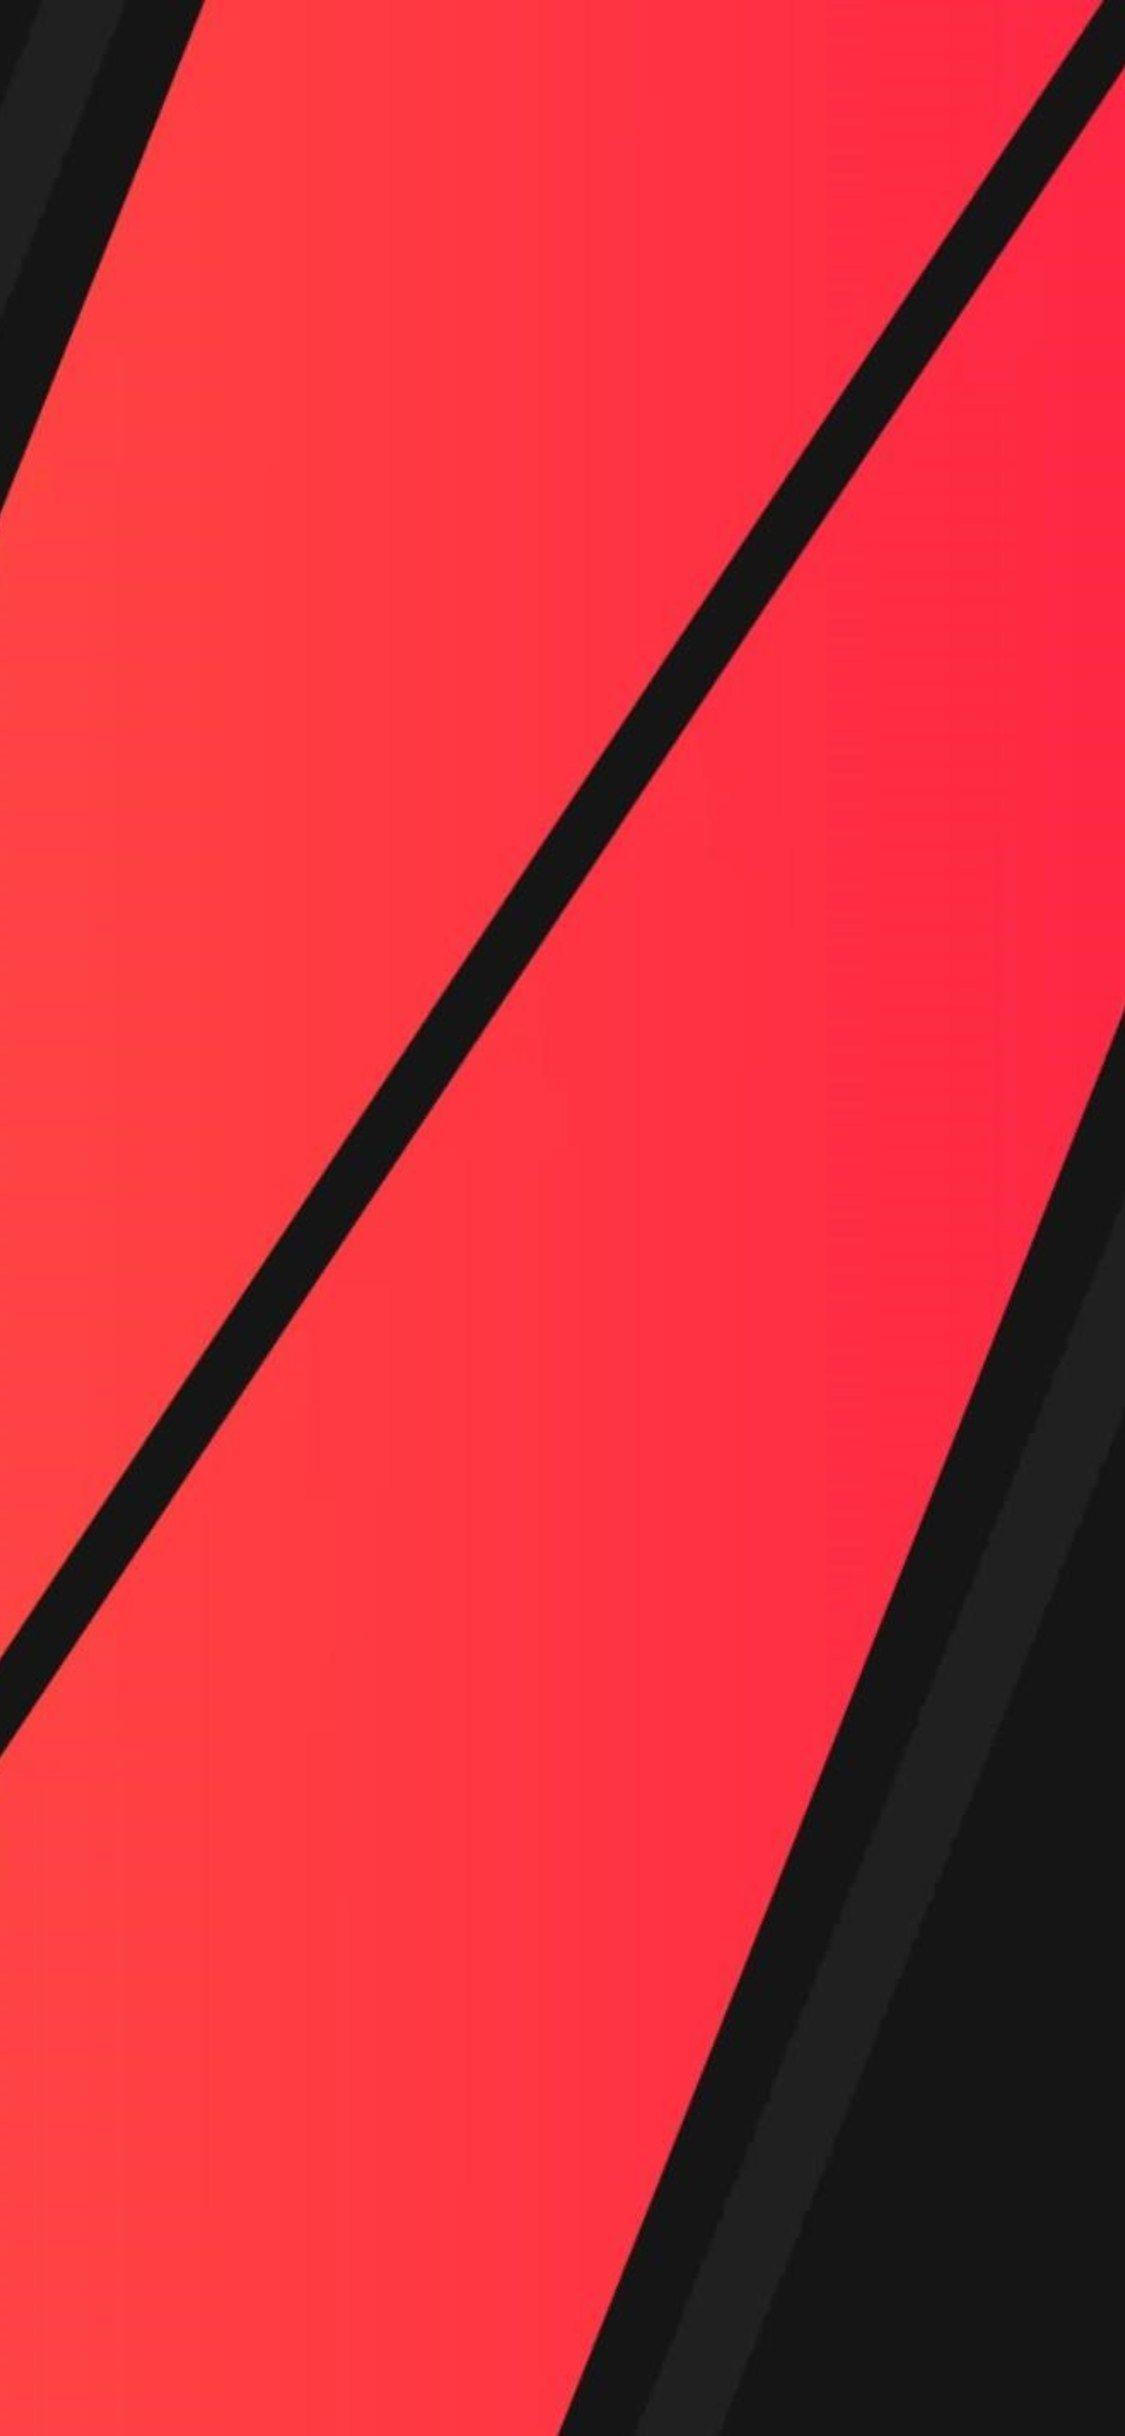 4K Red and Black iPhone Wallpapers - Top Free 4K Red and Black iPhone